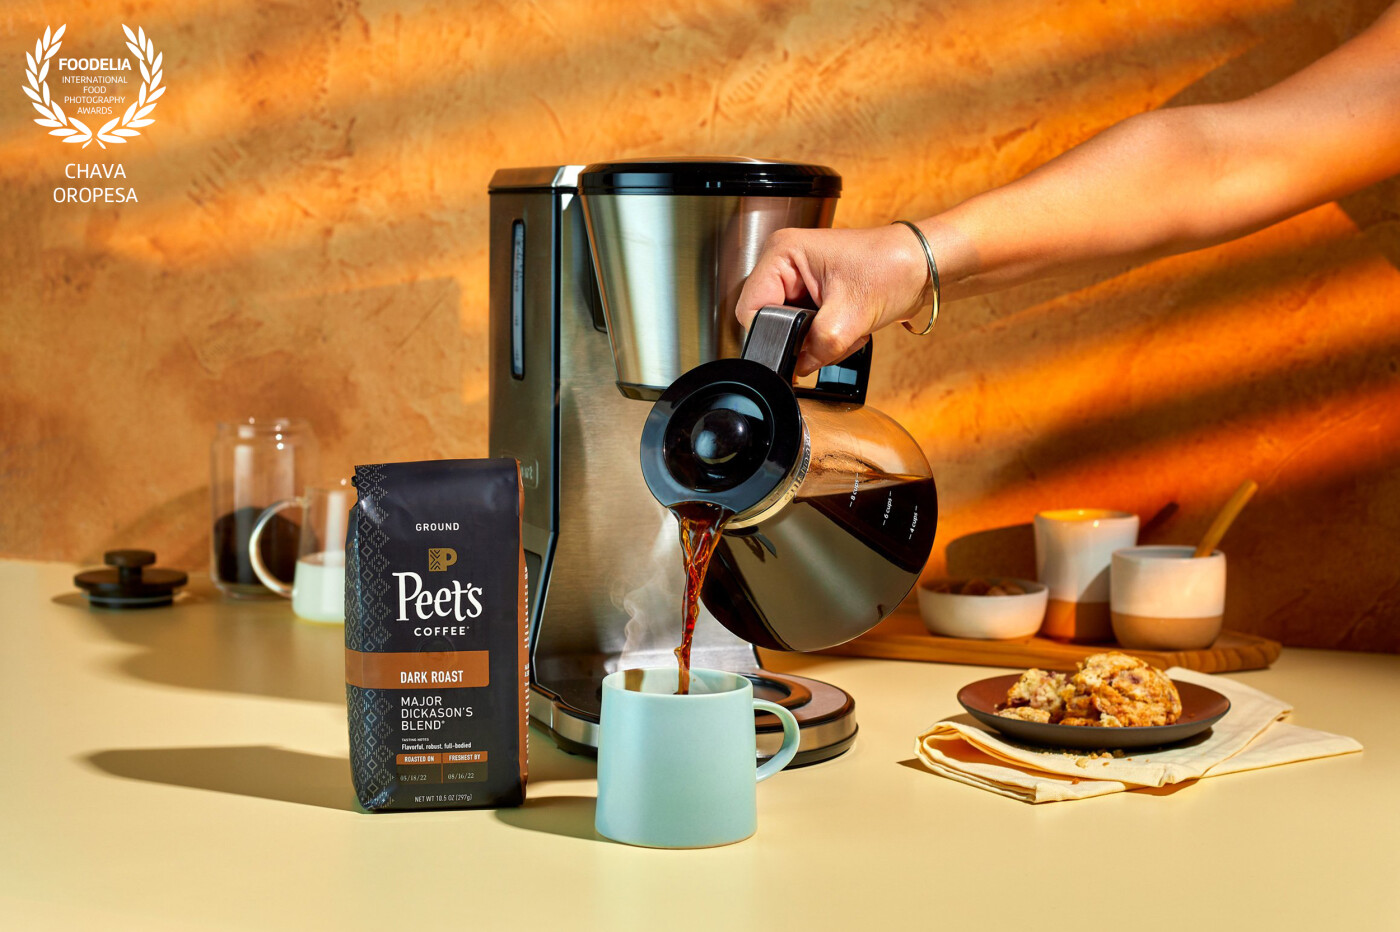 Client work for Peet's Coffee.<br />
Part of their image library to feature their new packaging.